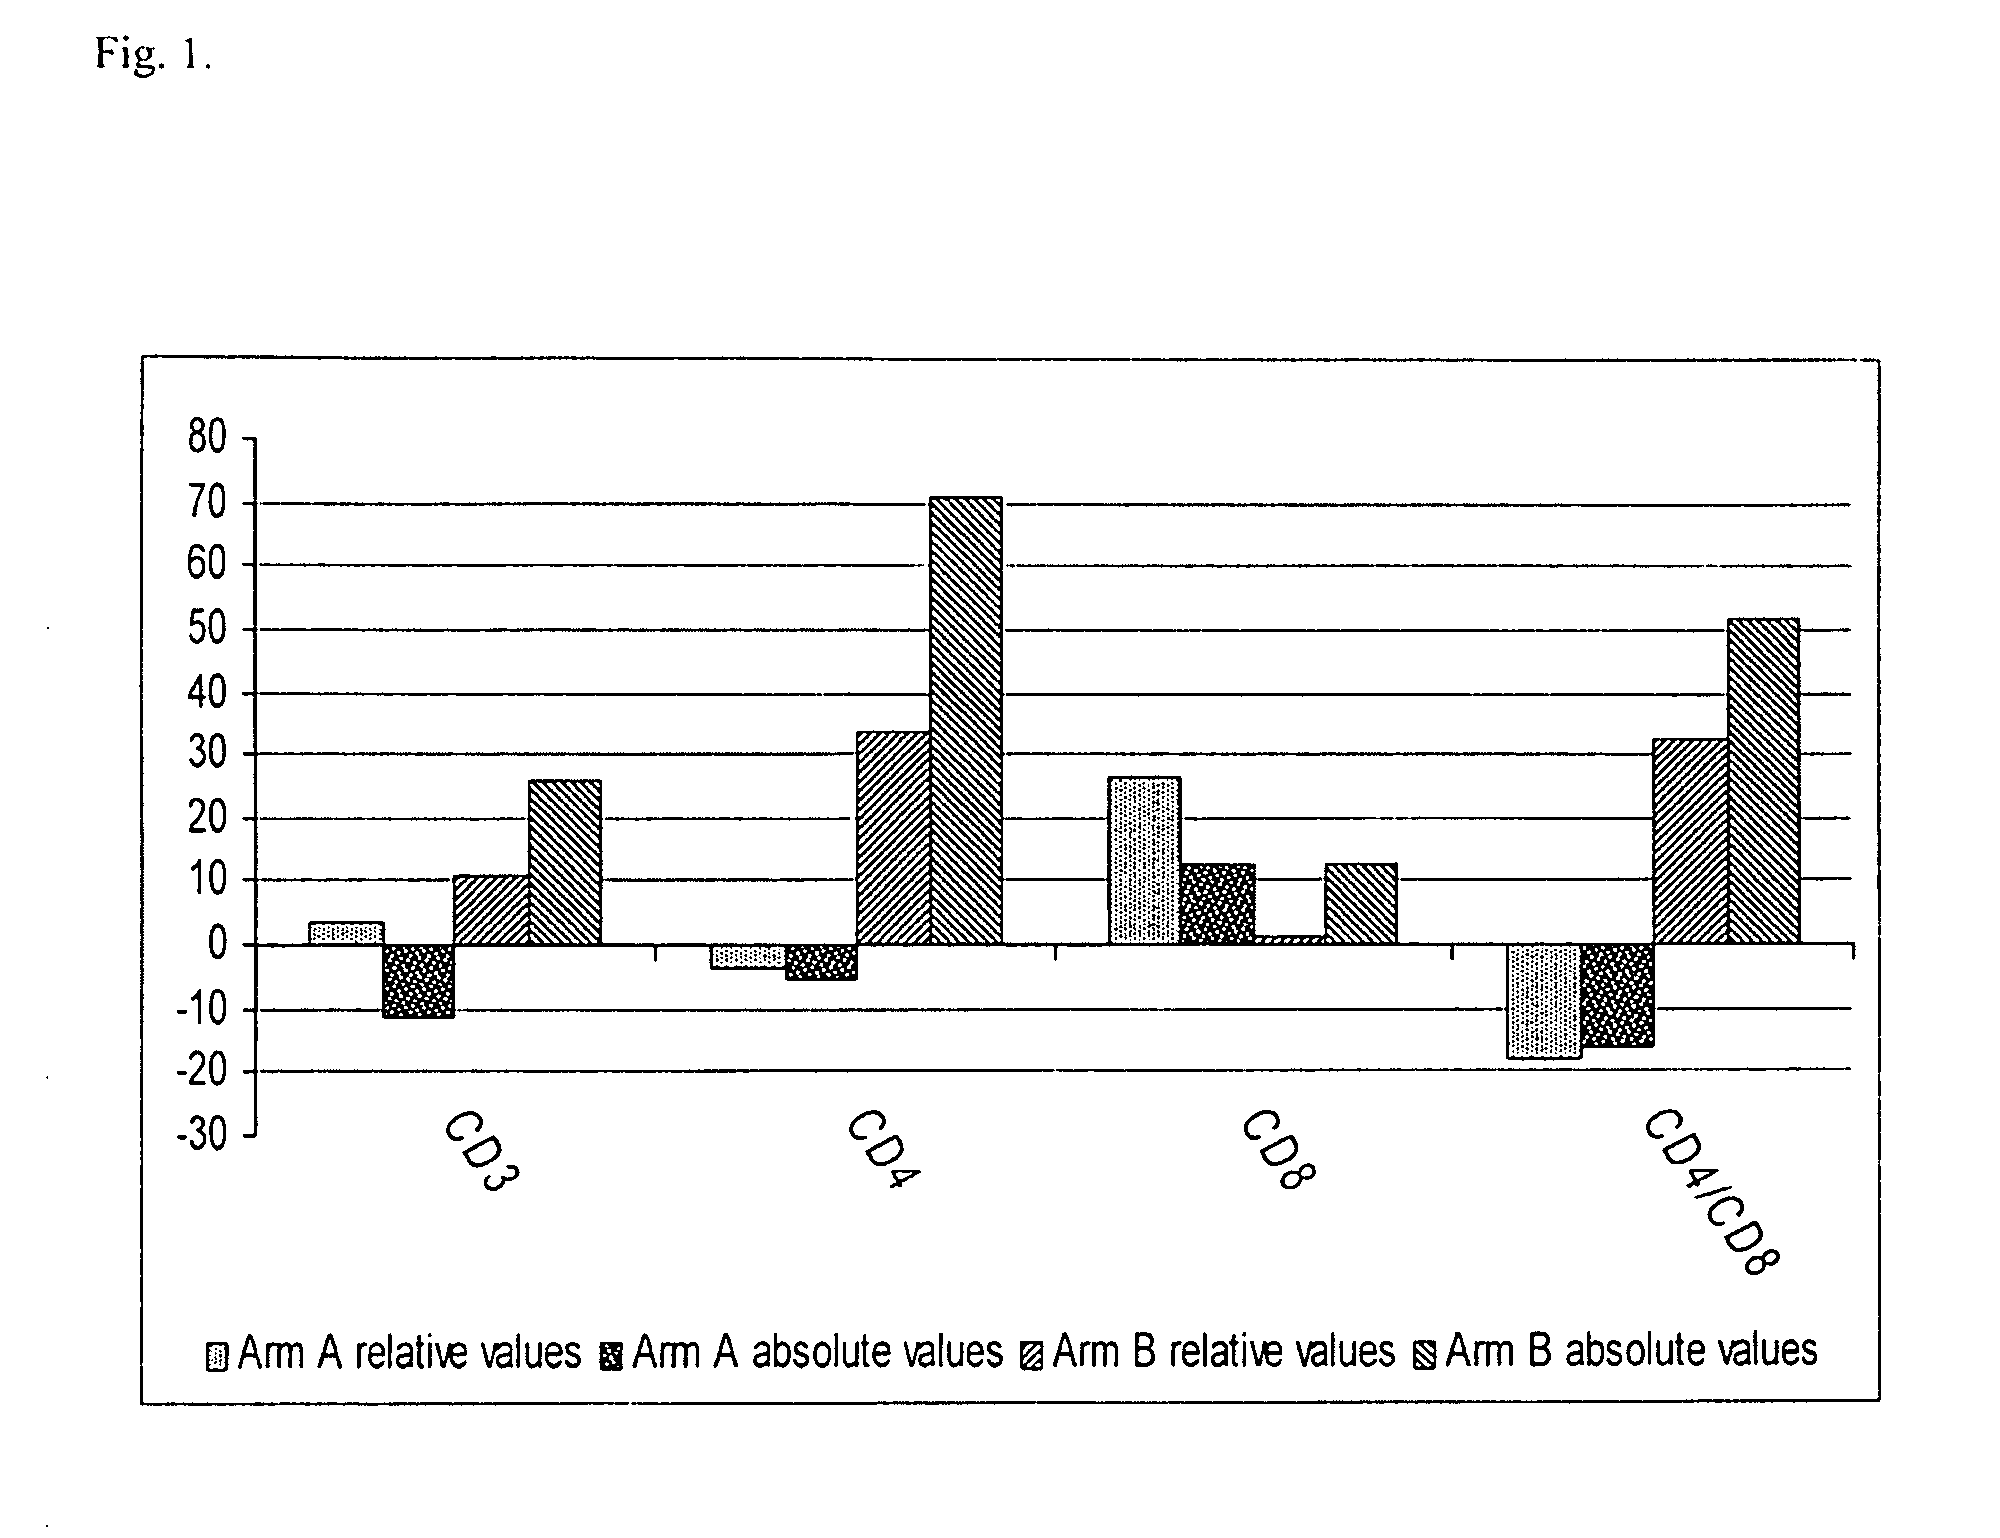 Composition and methods of use of an immunomodulator